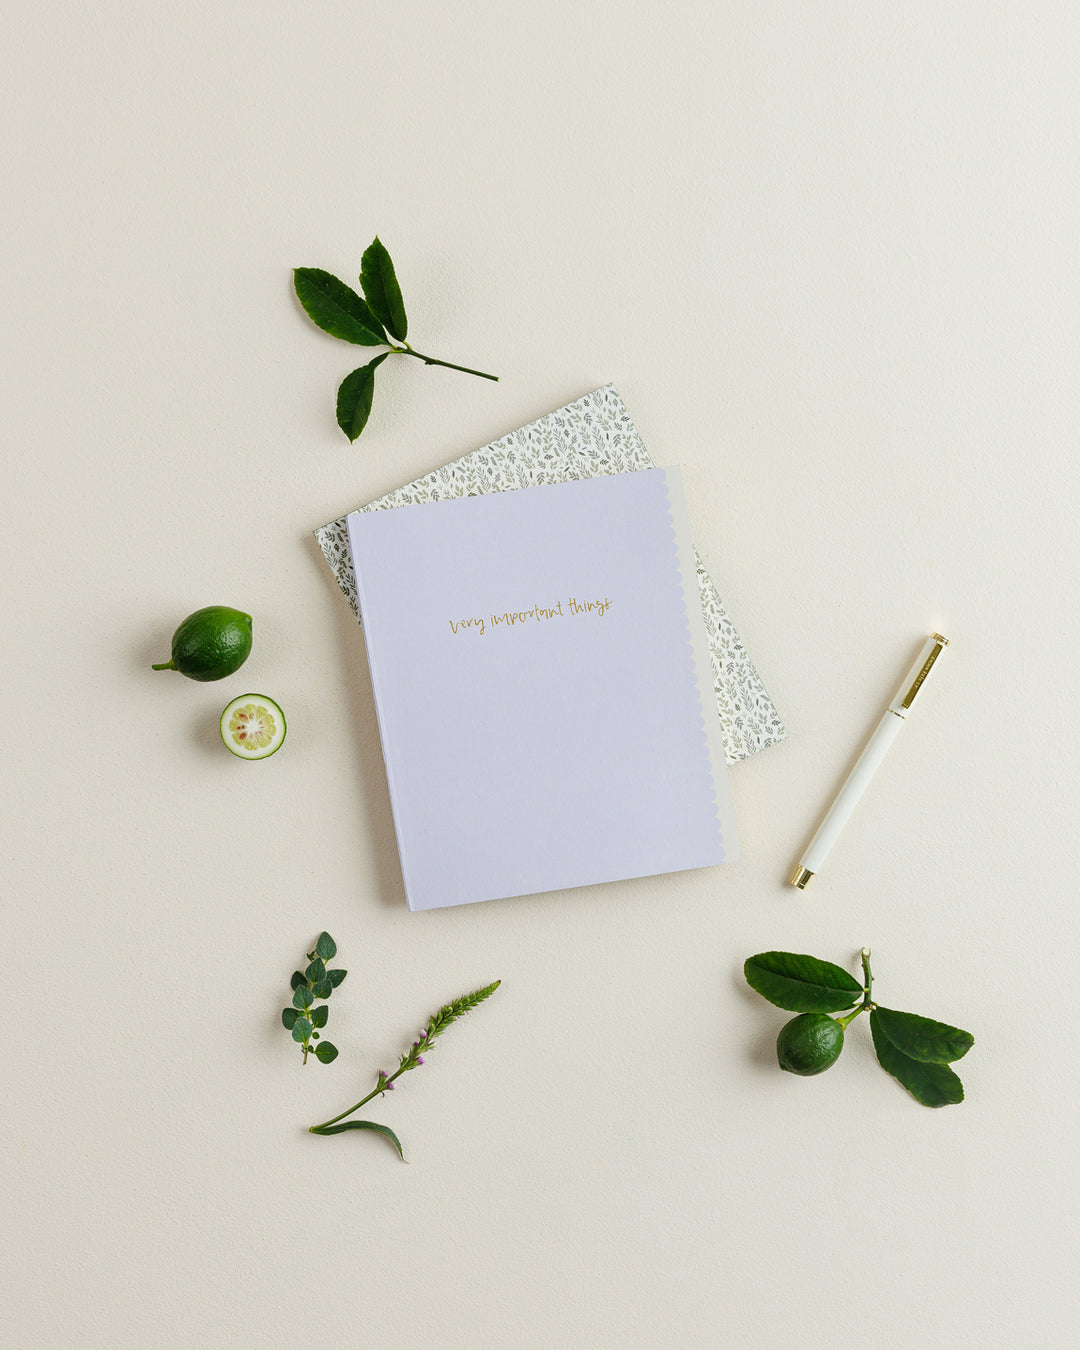 Emma Kate Co. Notebook | Signature | Very Important Things